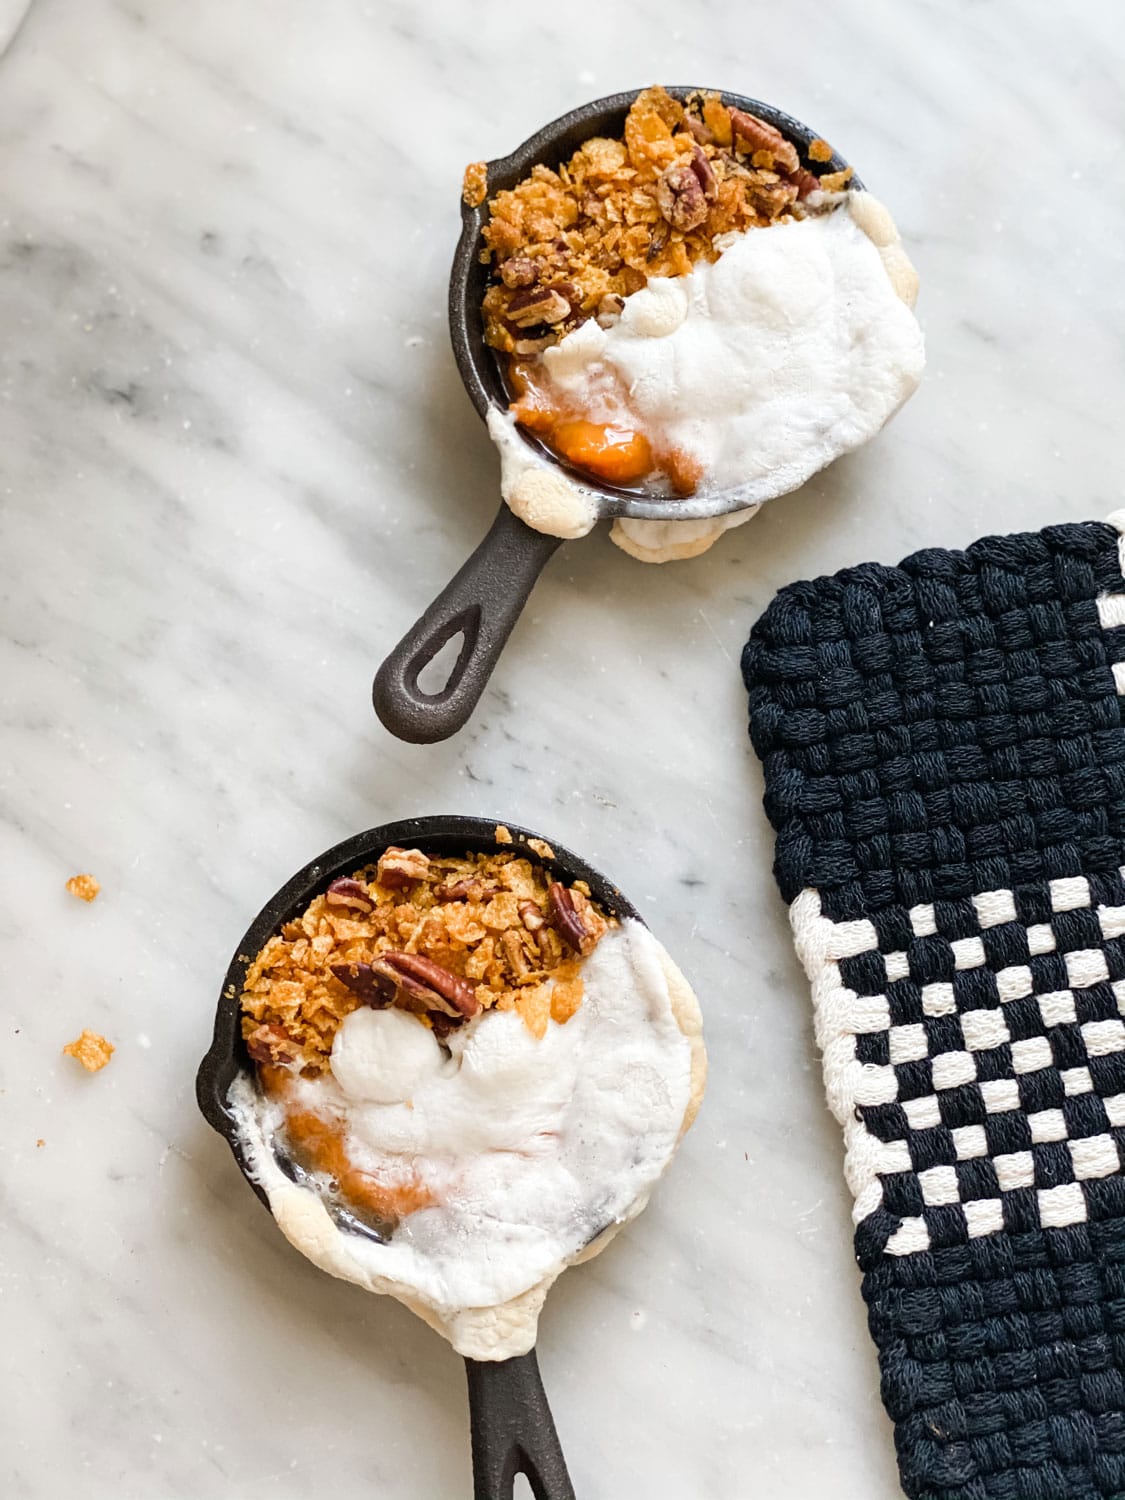 mini lodge skillets with sweet potato filling and topping on half and marshmallows on the other half